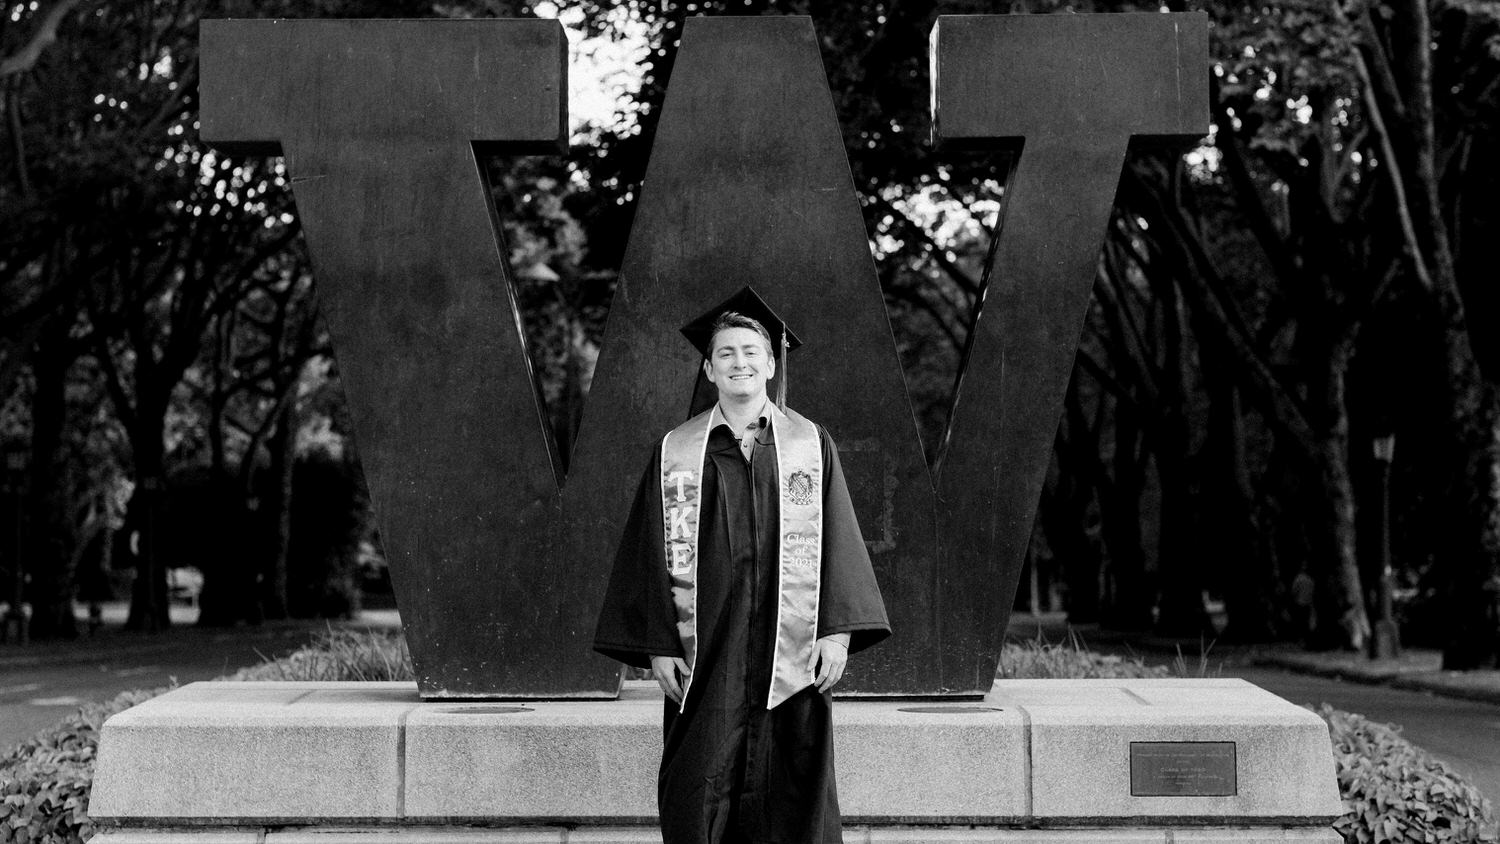 Black and white portrait of University of Washington Graduate standing in front of UW logo in his cap and gown